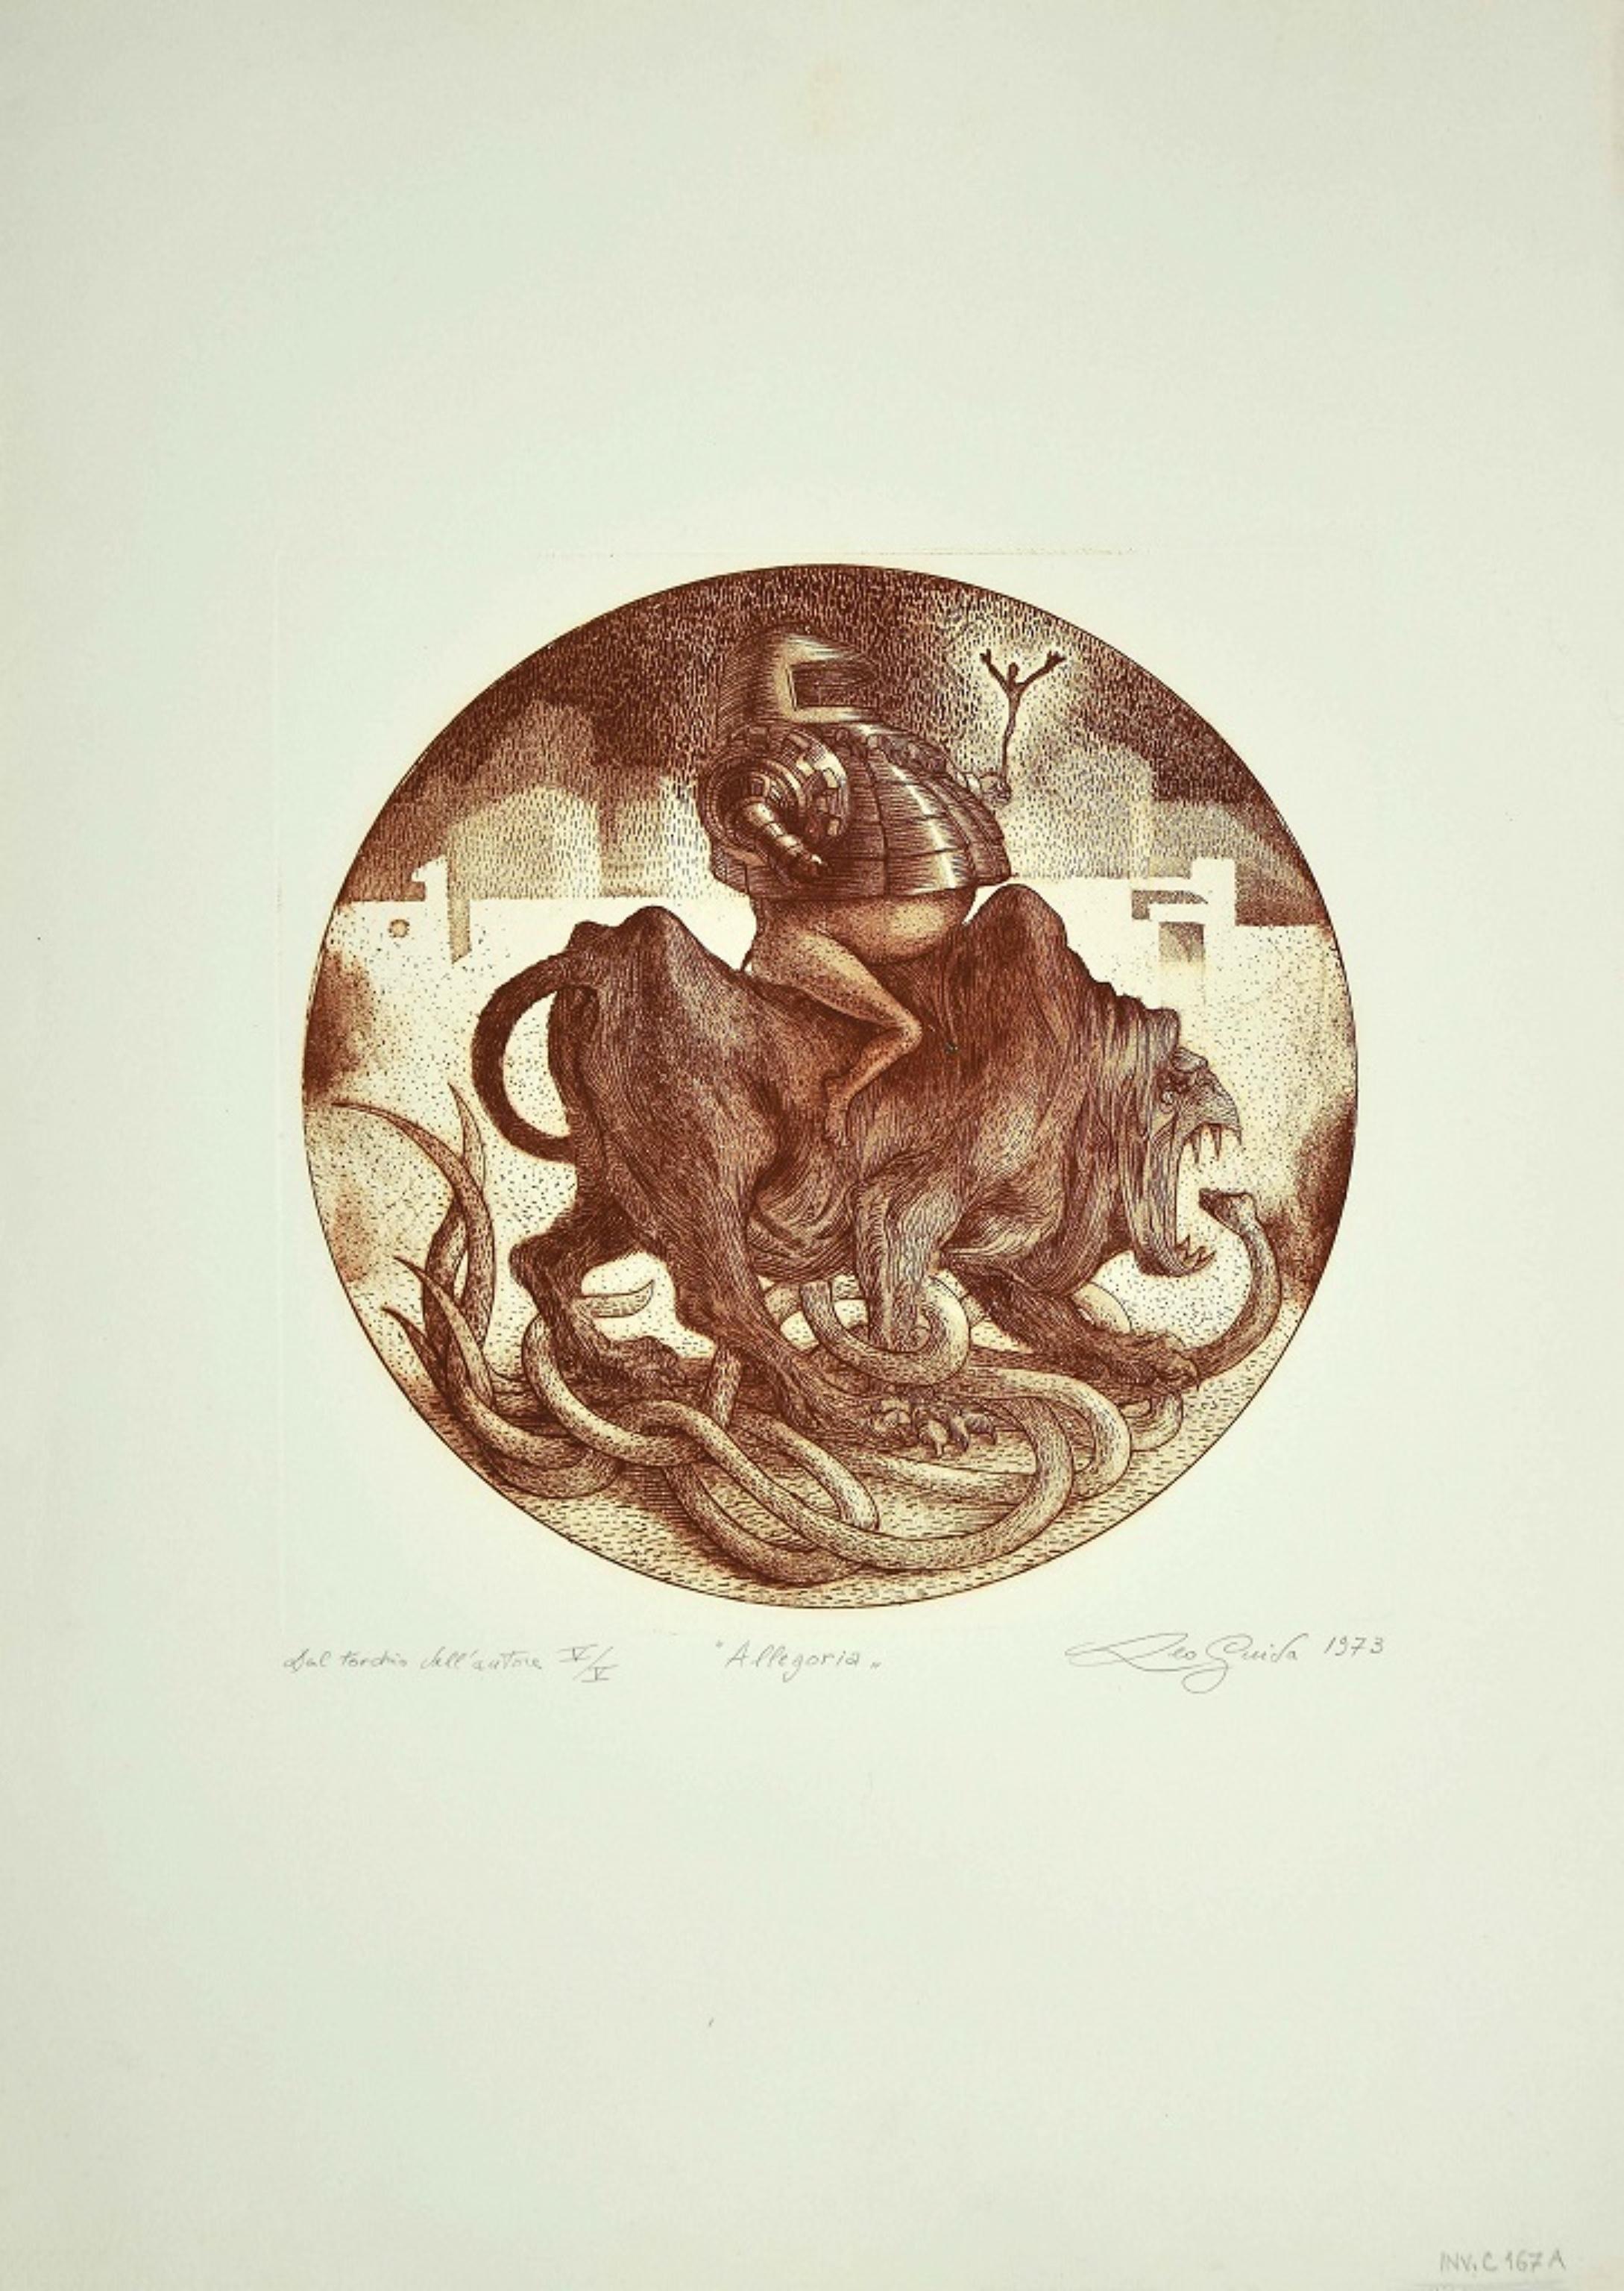 Allegory is an original Contemporary artwork realized in 1973 by the italian artist Leo Guida.

Etching on paper. 

Numbered in Roman Numerals, Titled, Hand-signed and Dated in pencil on the lower margin: dal torchio dell'artista V/V "Allegoria" Leo